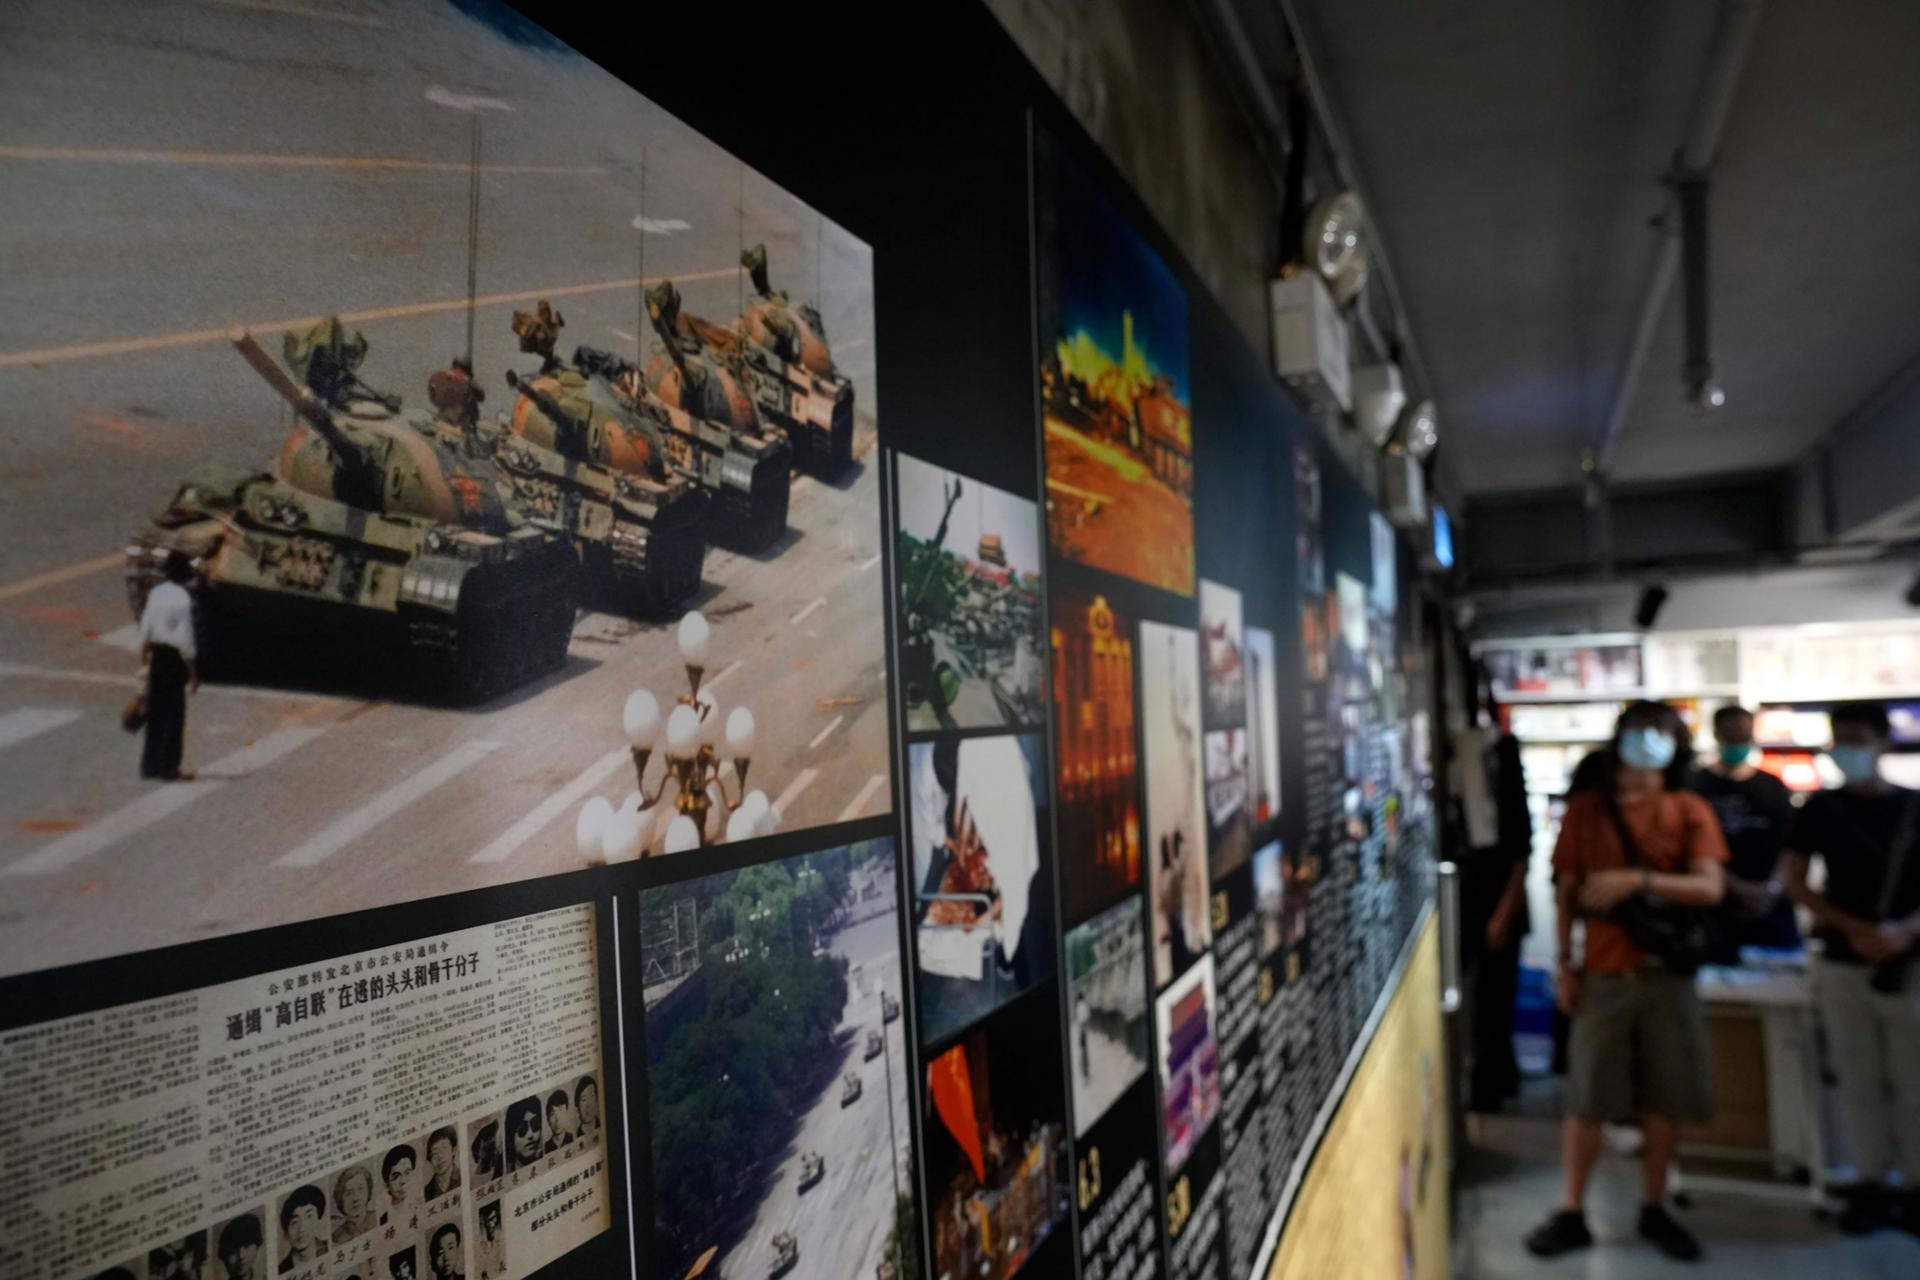 A photograph of a man blocking a line of four tanks in a street is shown hanging with other photographs and newspaper clippings.